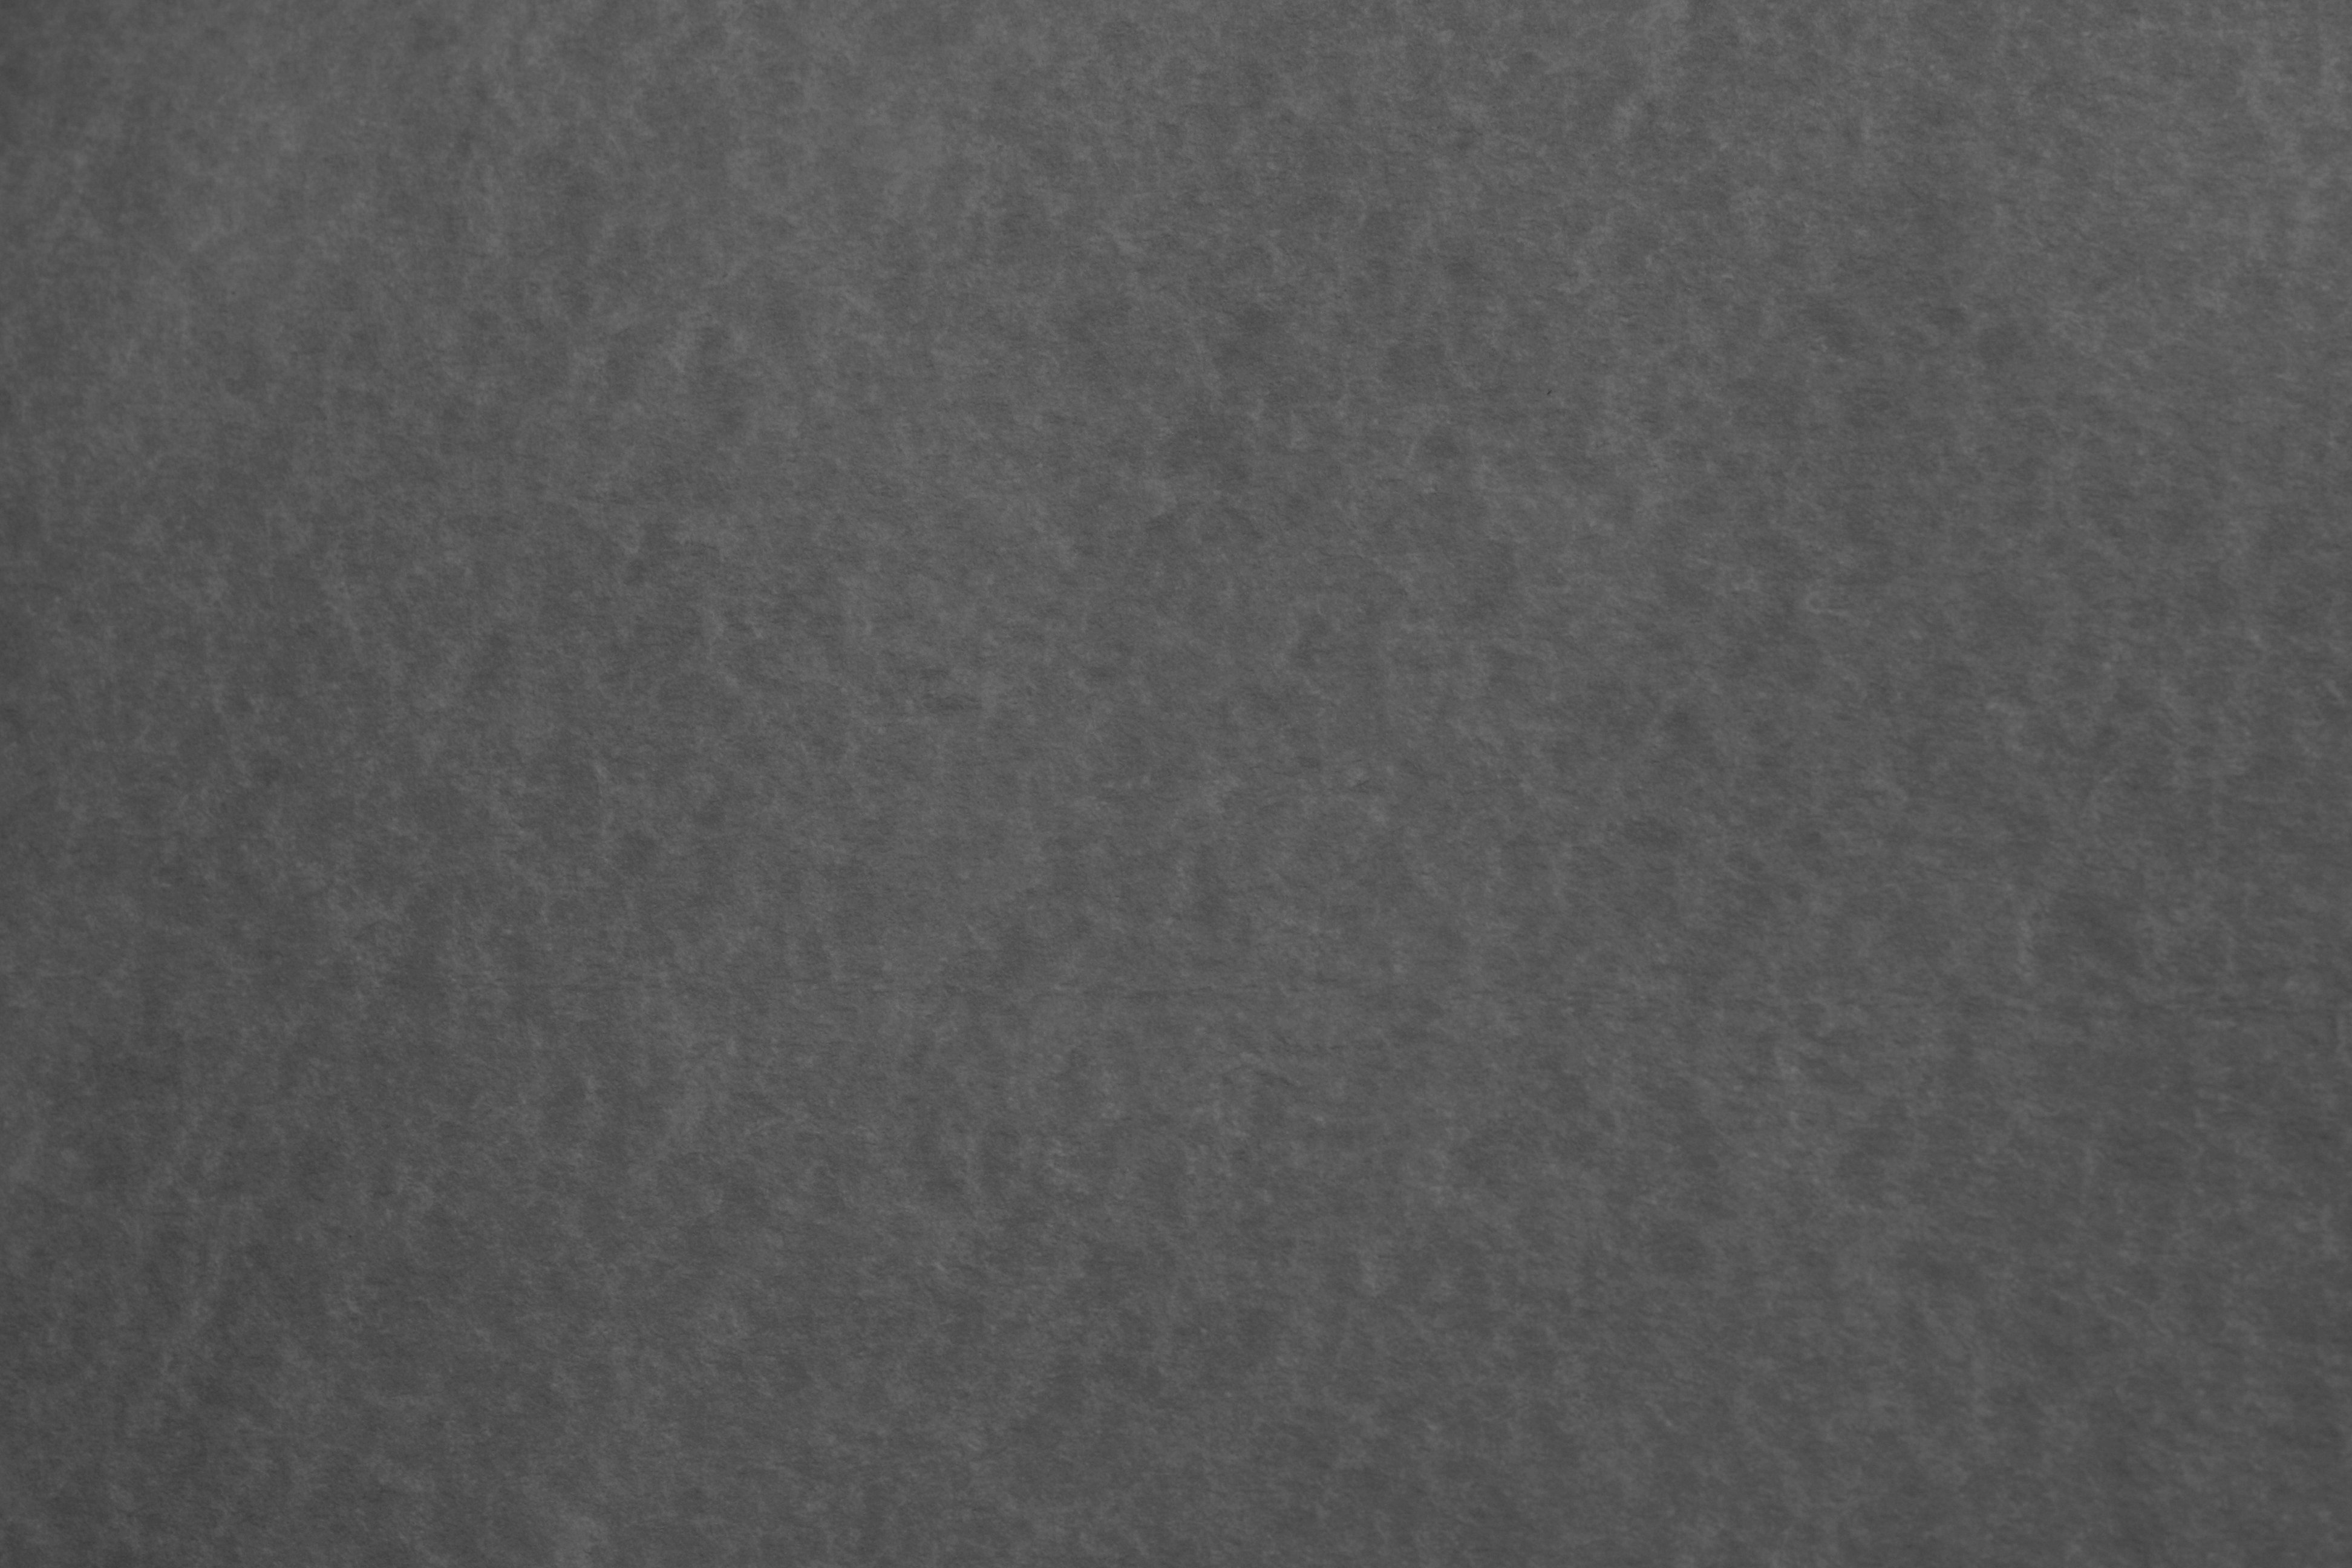 Light Gray Parchment Paper Seamless Pattern Background Or Wallpaper